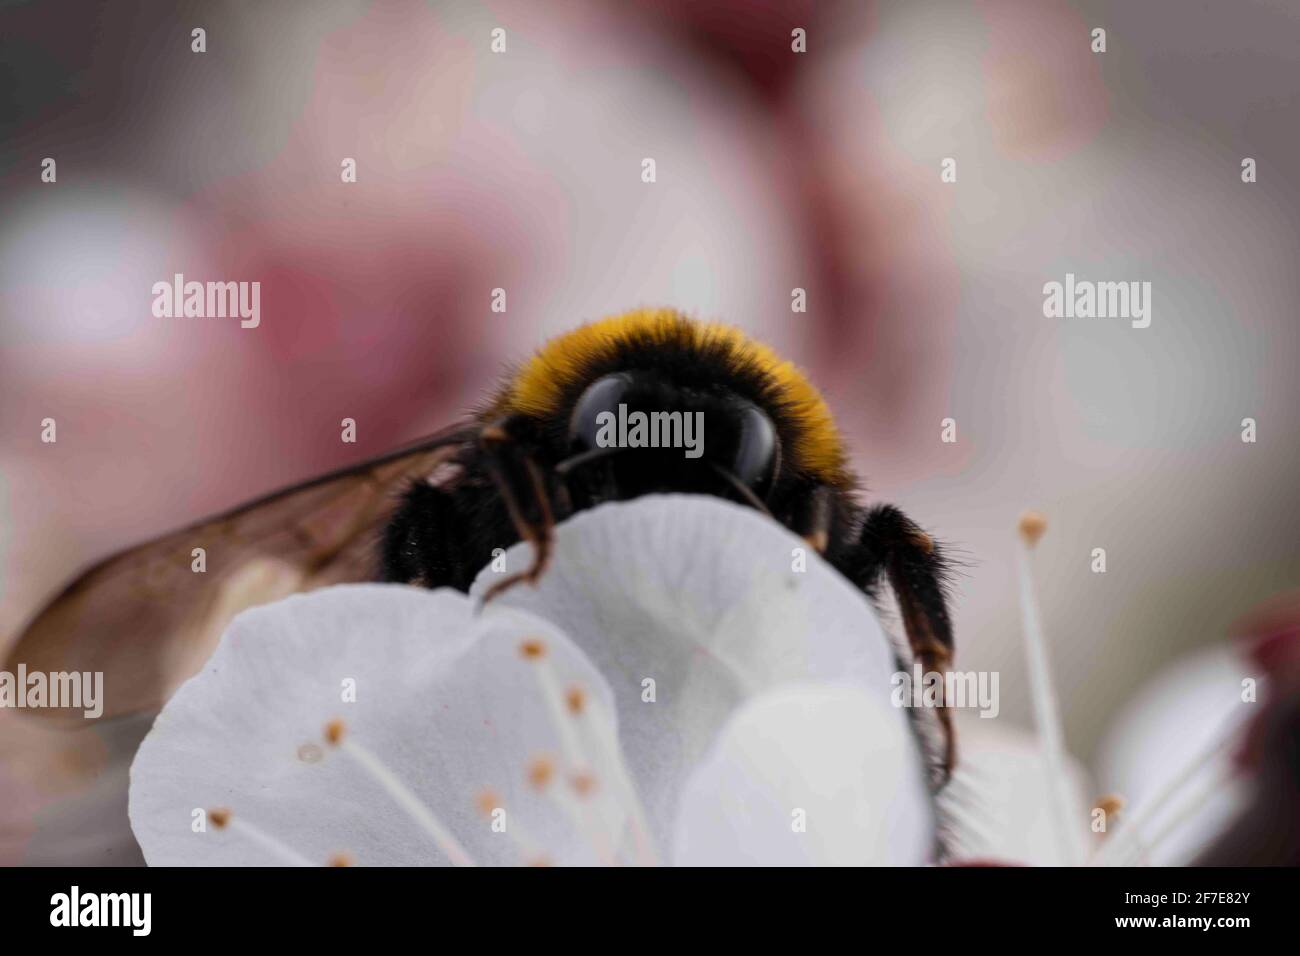 Macro shot of a bumble bee on a fruit tree flower Stock Photo